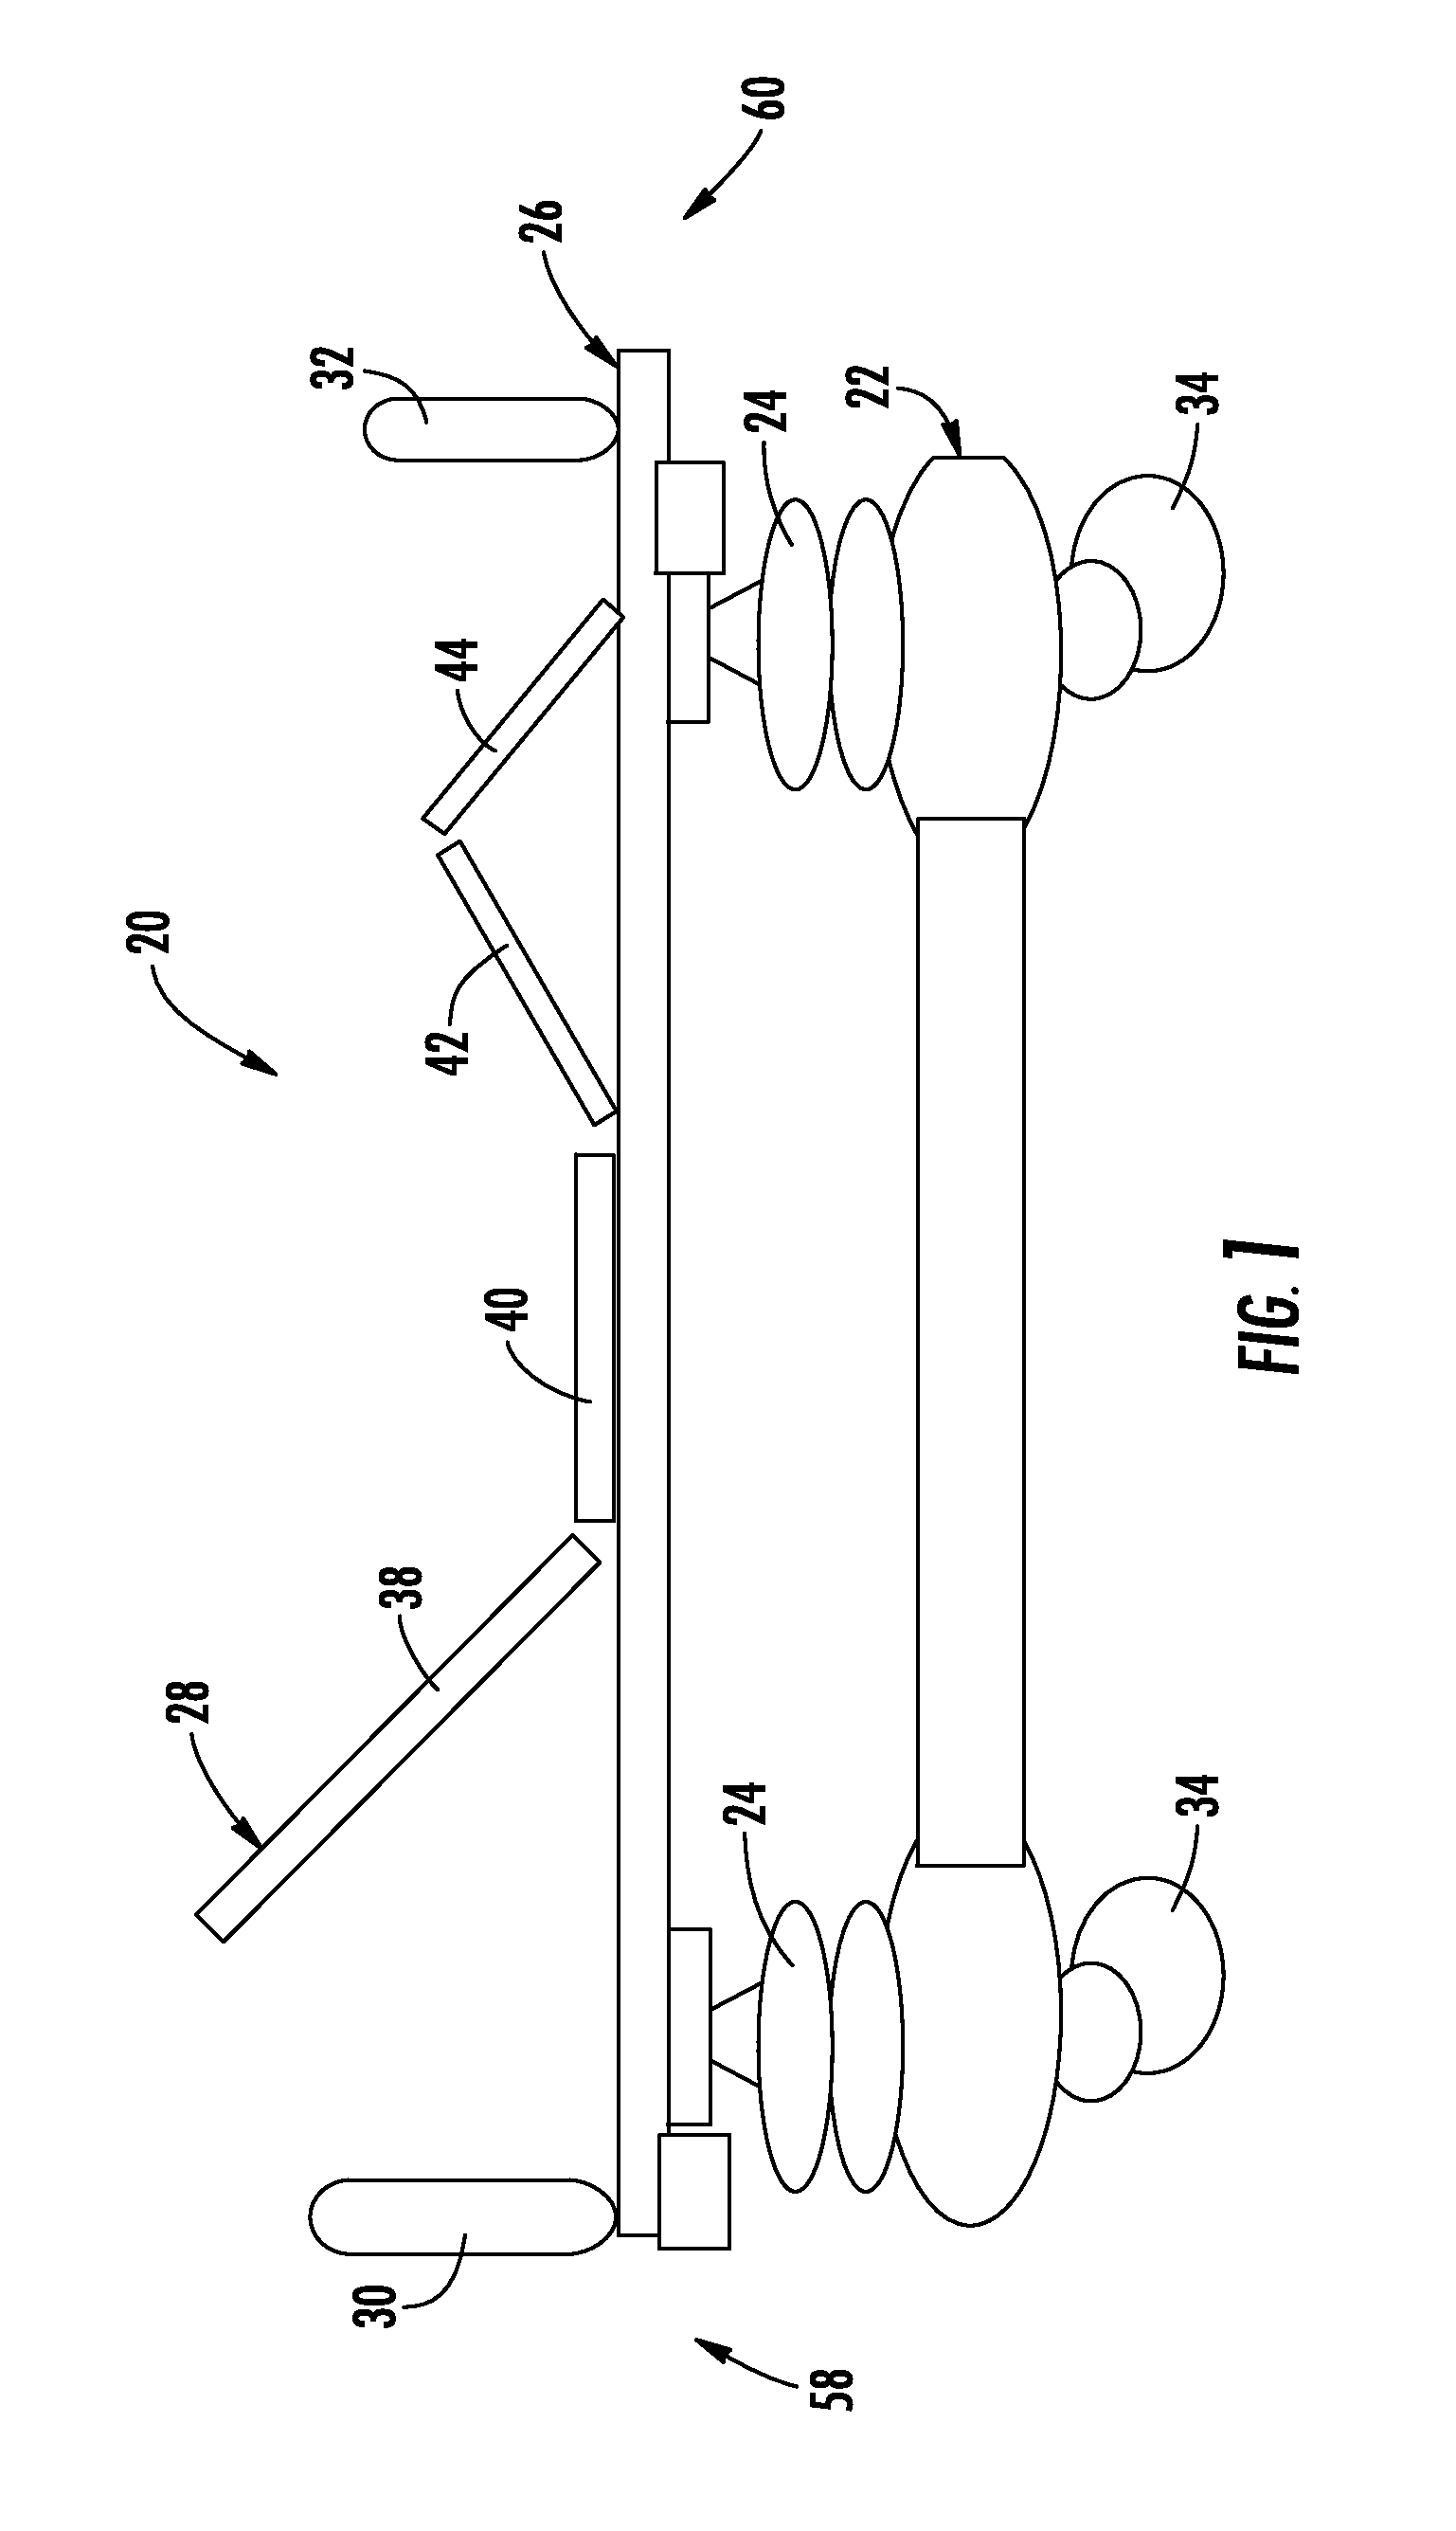 Patient support apparatus and controls therefor